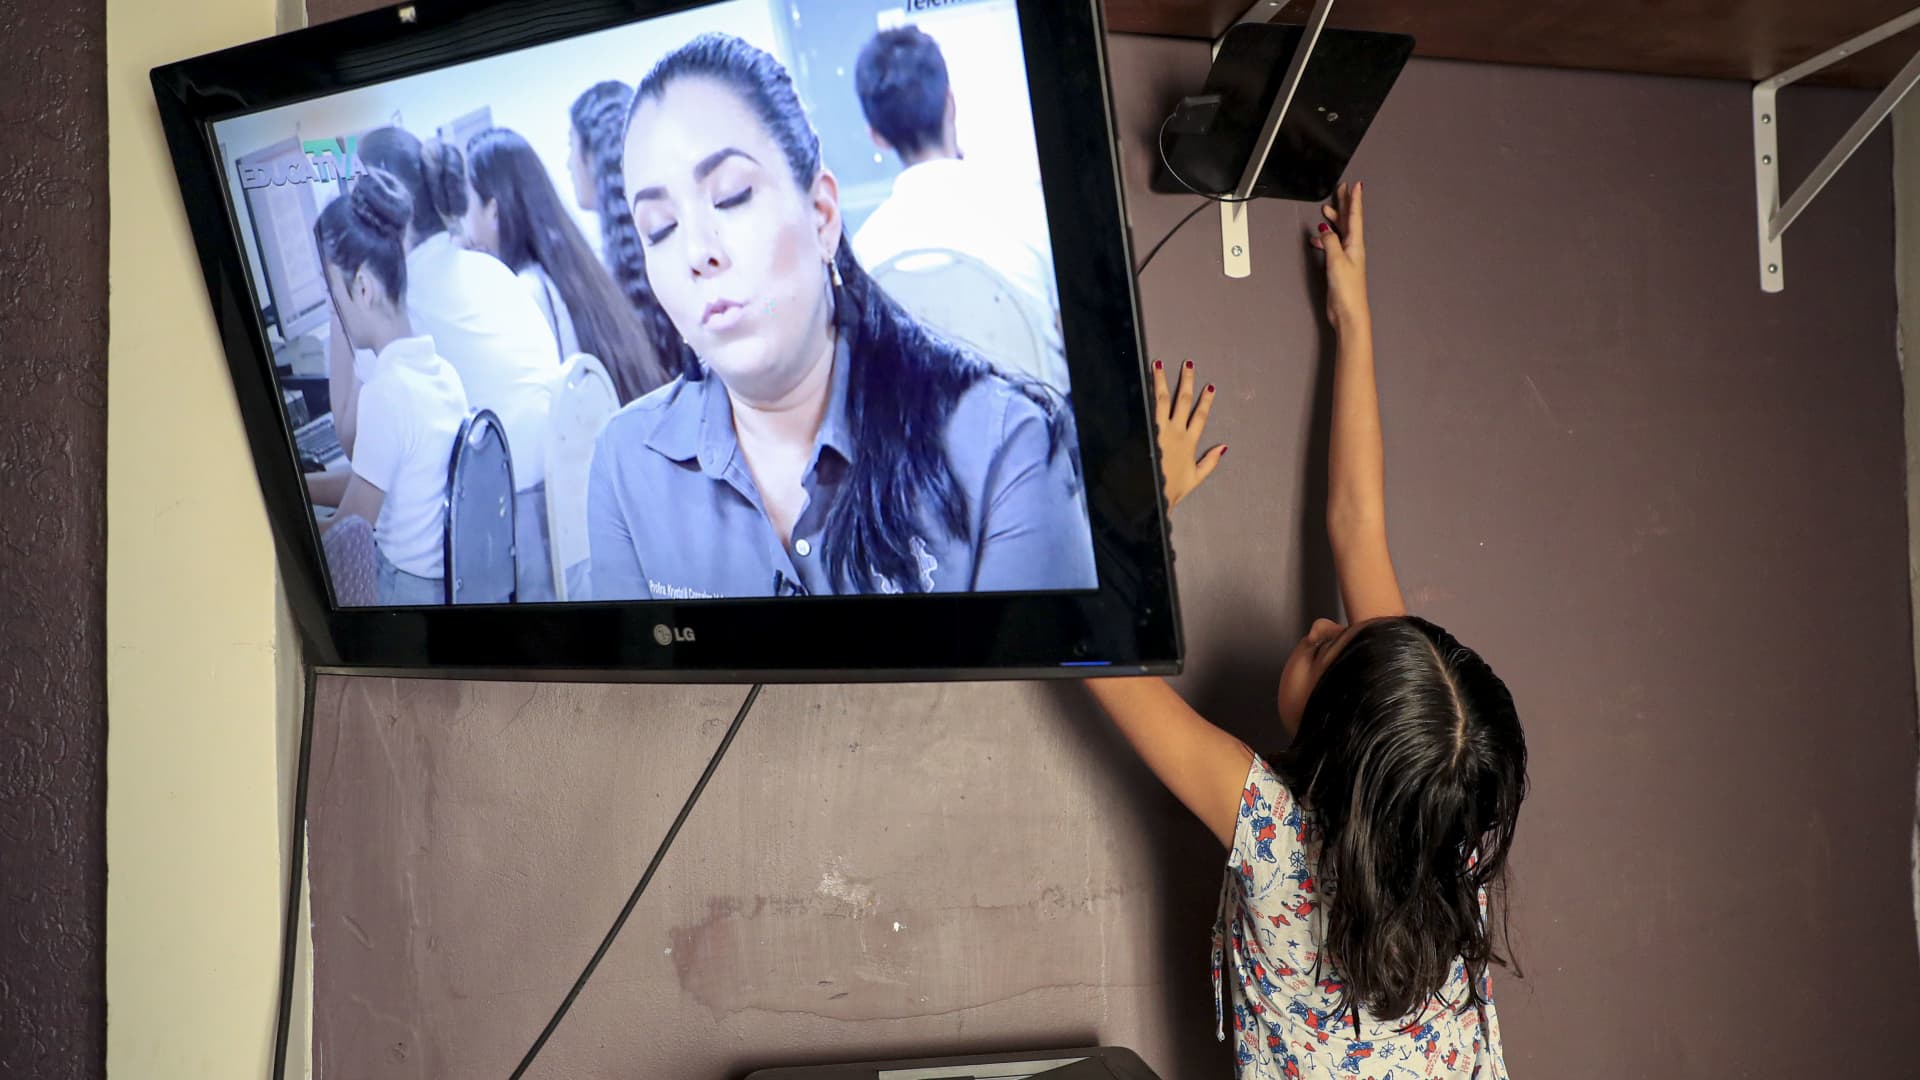 A young girl adjusts the antenna of a television in an attempt to obtain a digital signal.